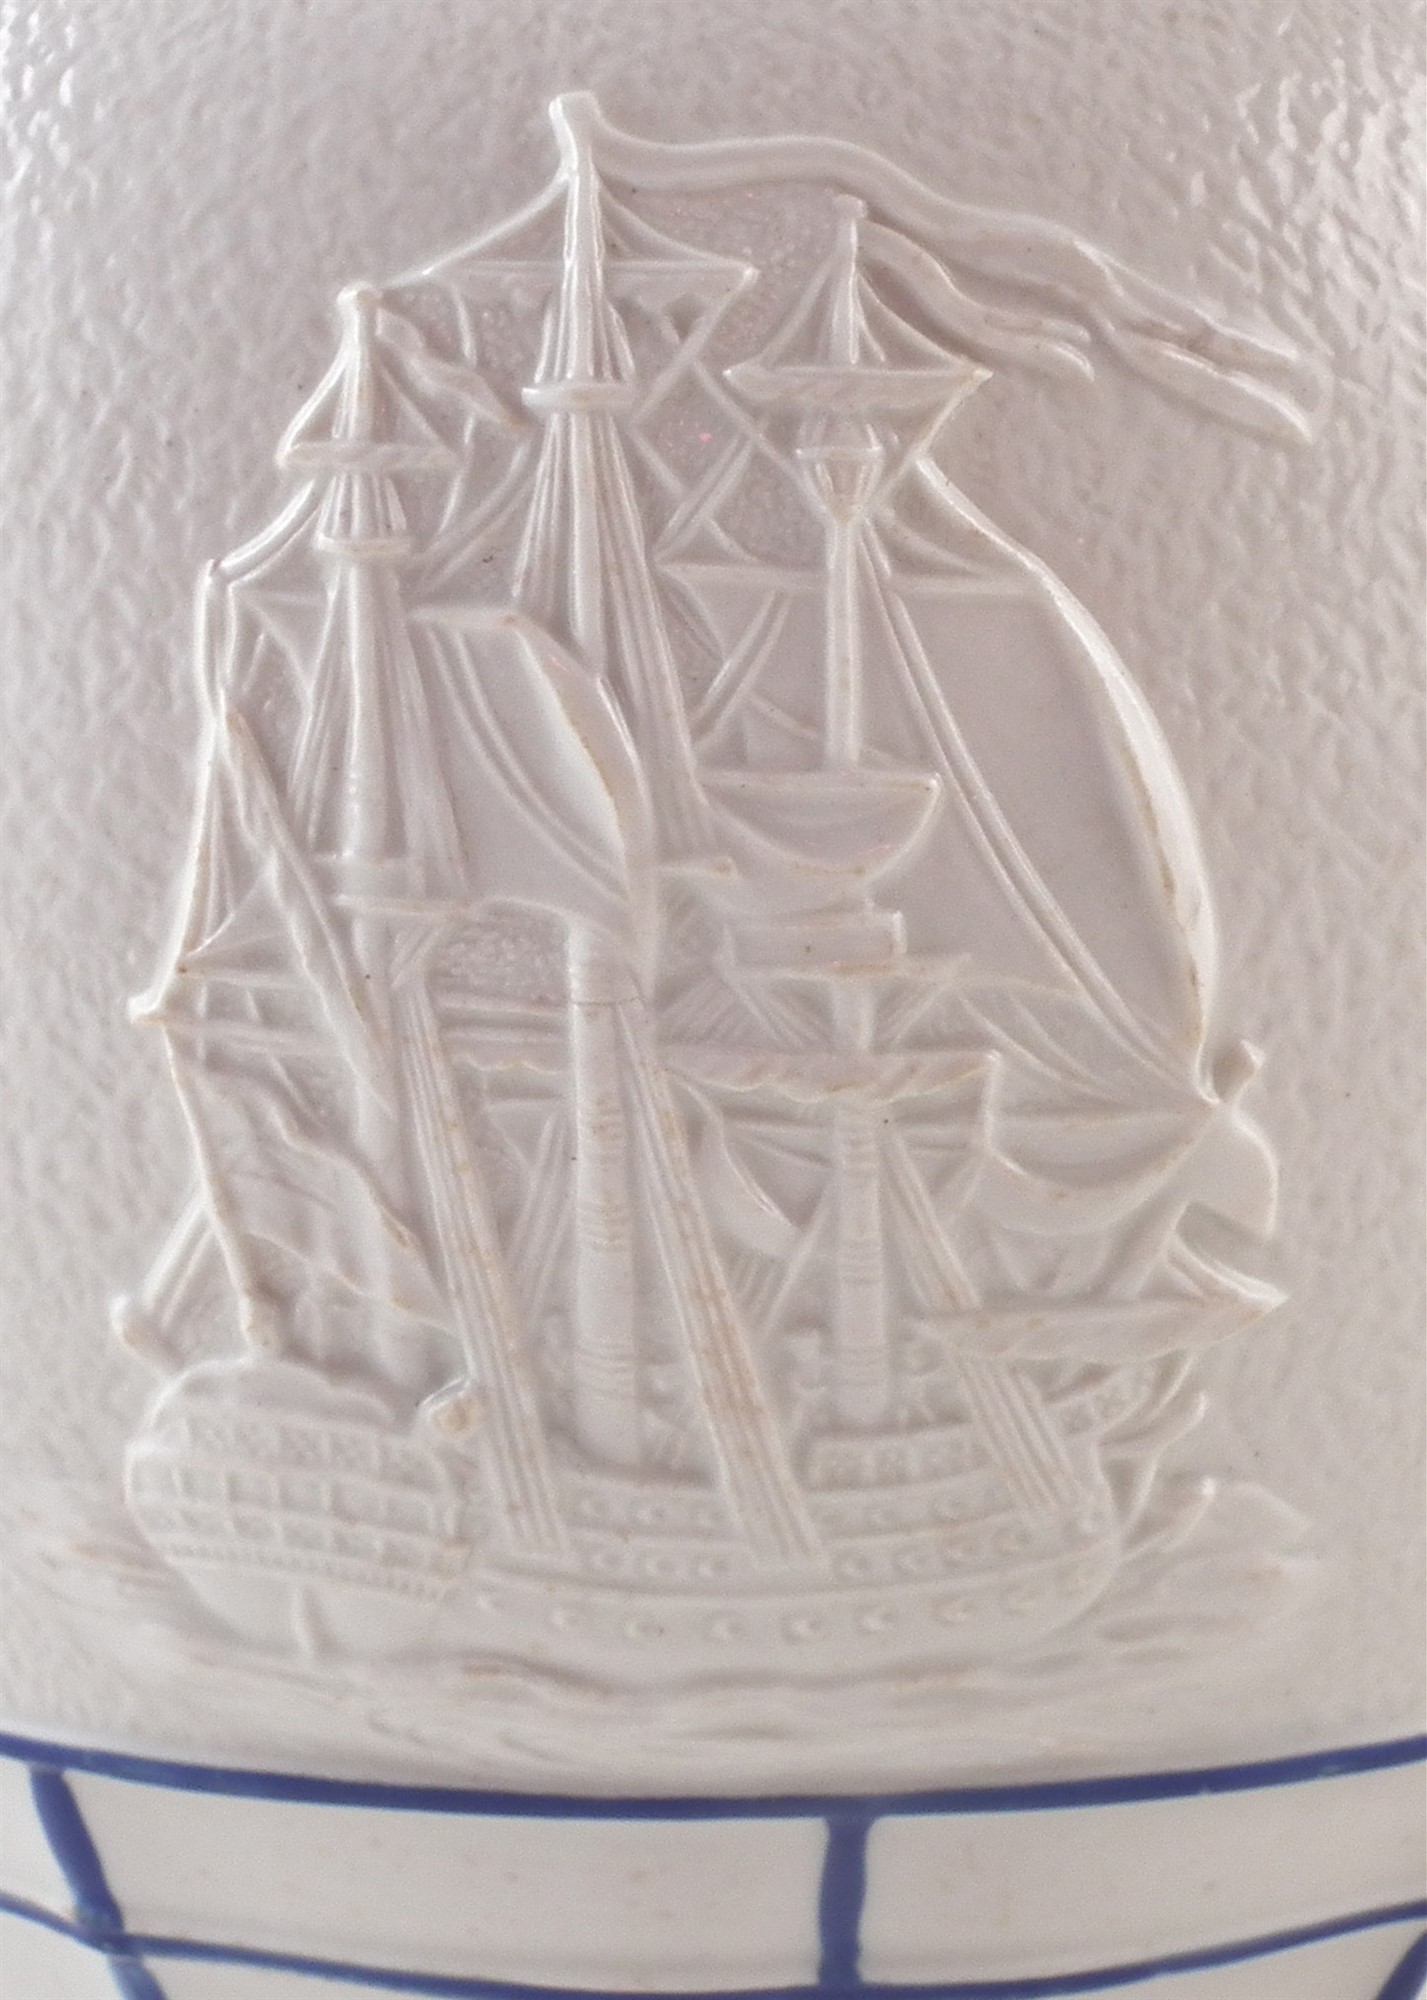 Staffordshire Lord Nelson commemorative jug, sprig moulded with a tall ship below the spout, the - Image 2 of 8